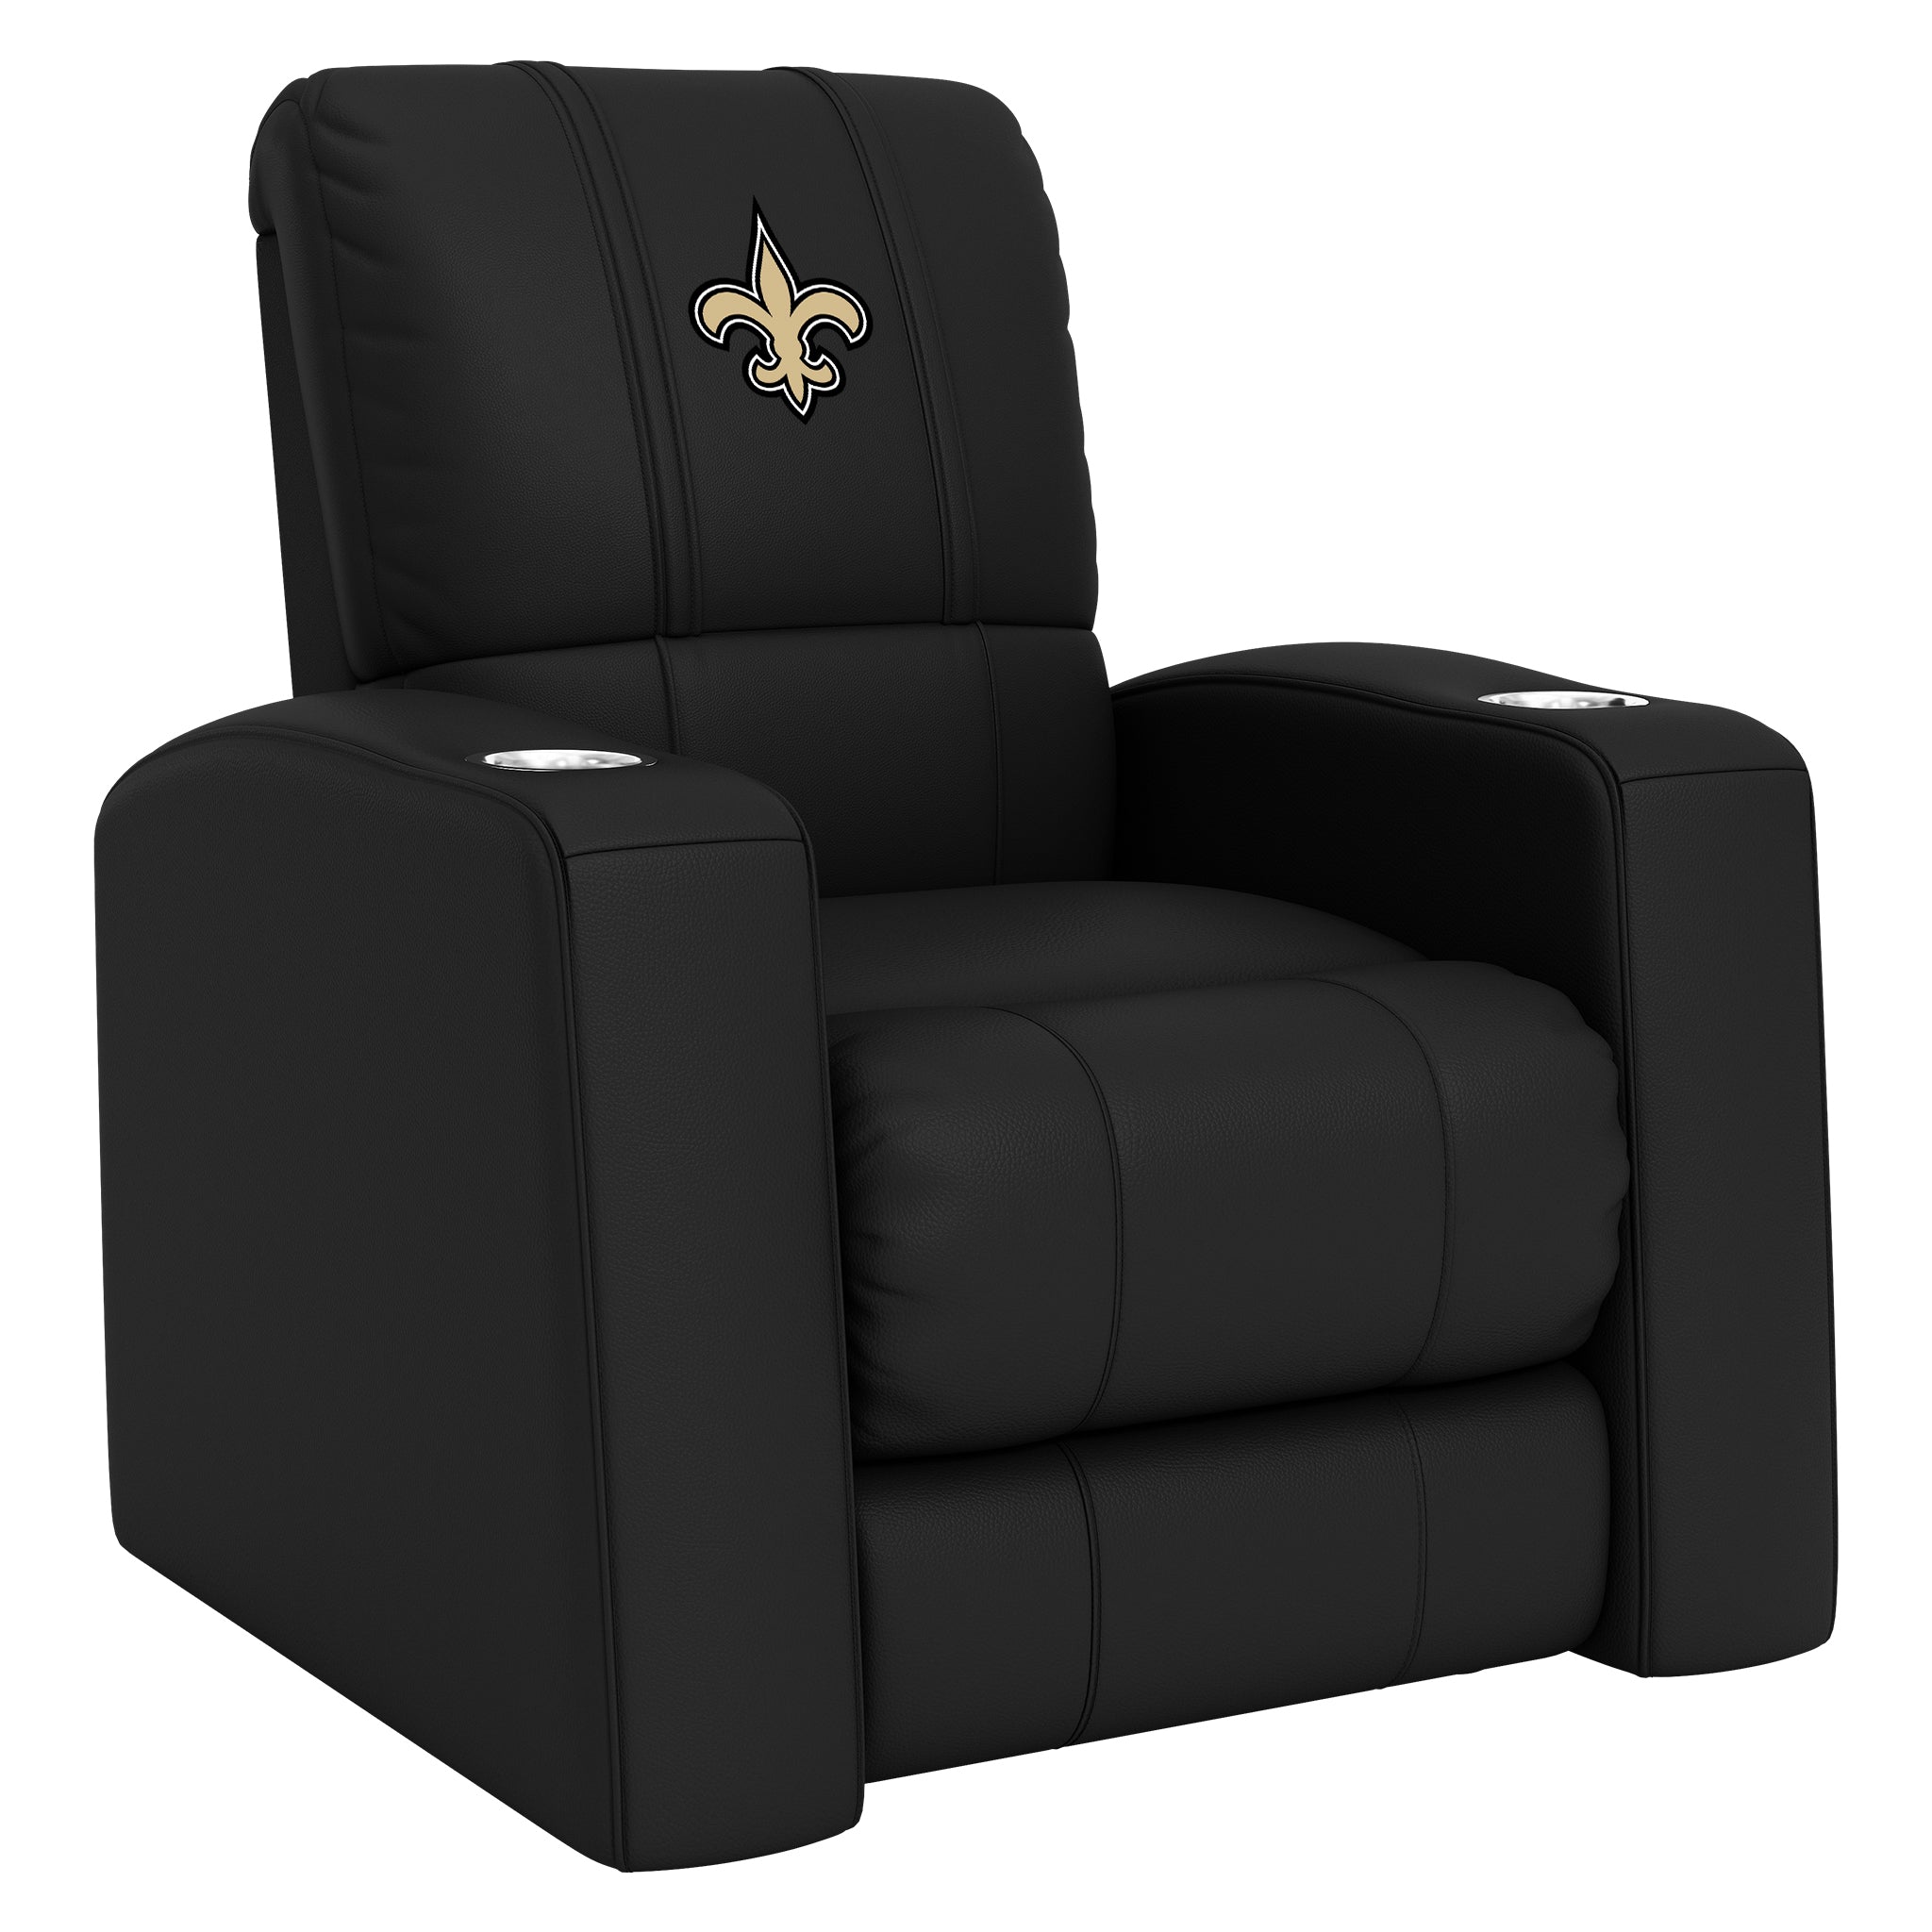 New Orleans Saints Home Theater Recliner